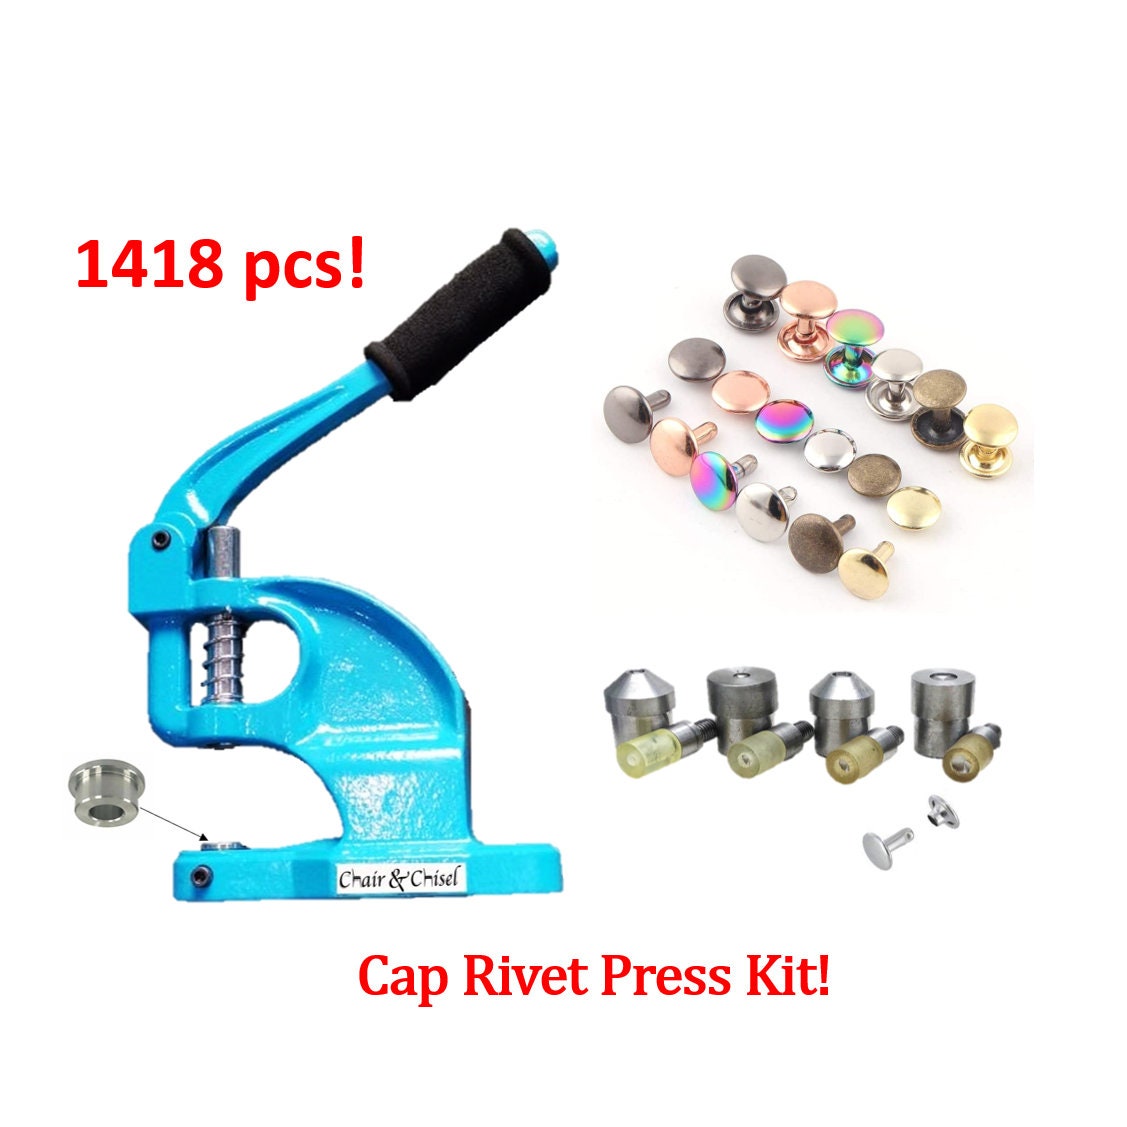 Cap Rivet Hand Press Starter Kit with dies and Double Cap RIvets - over 1400pcs!